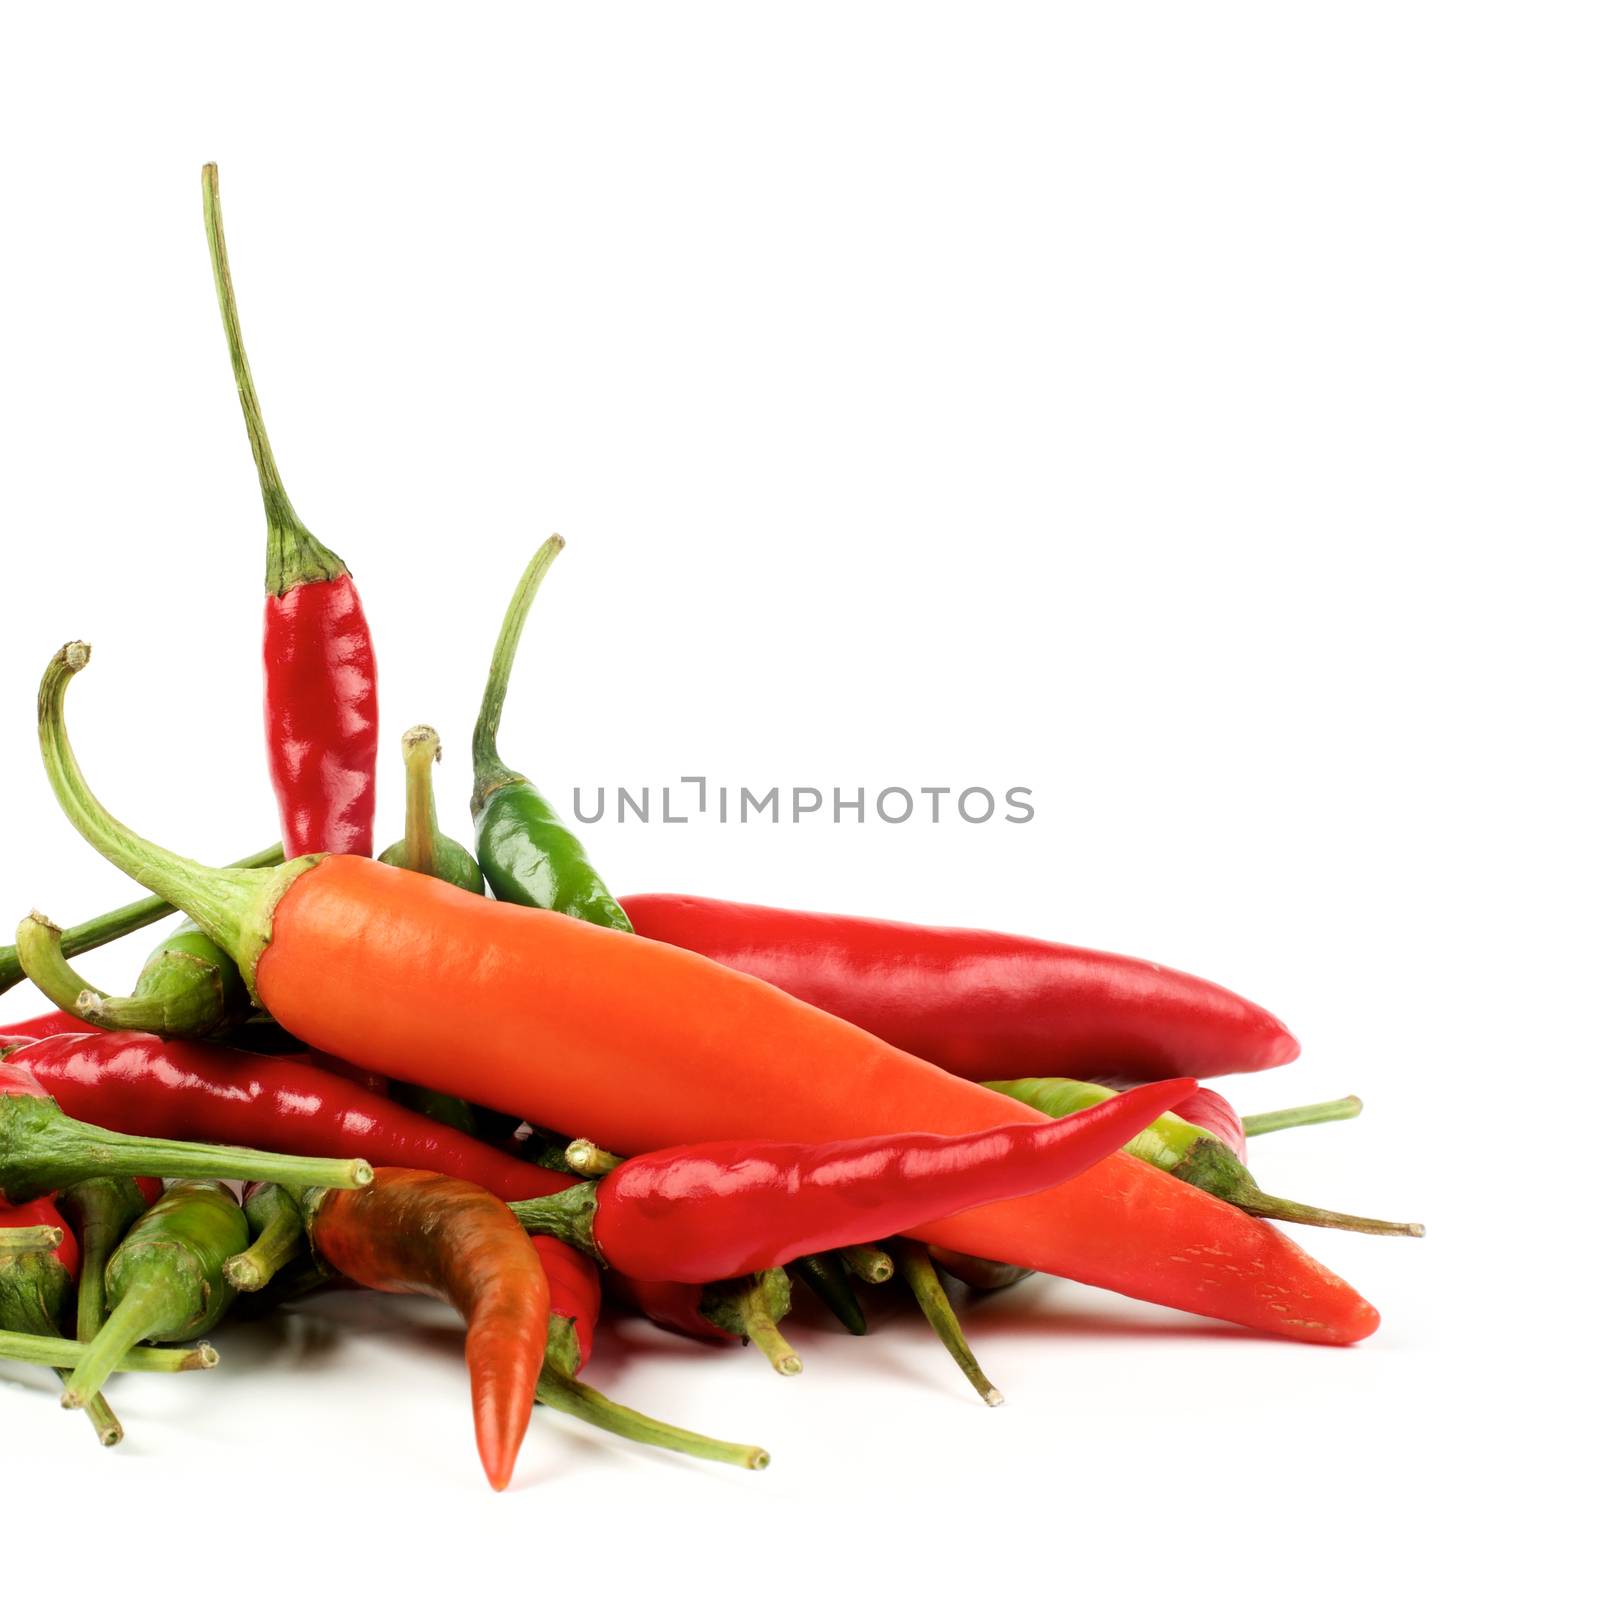 Heap of Chili Peppers by zhekos